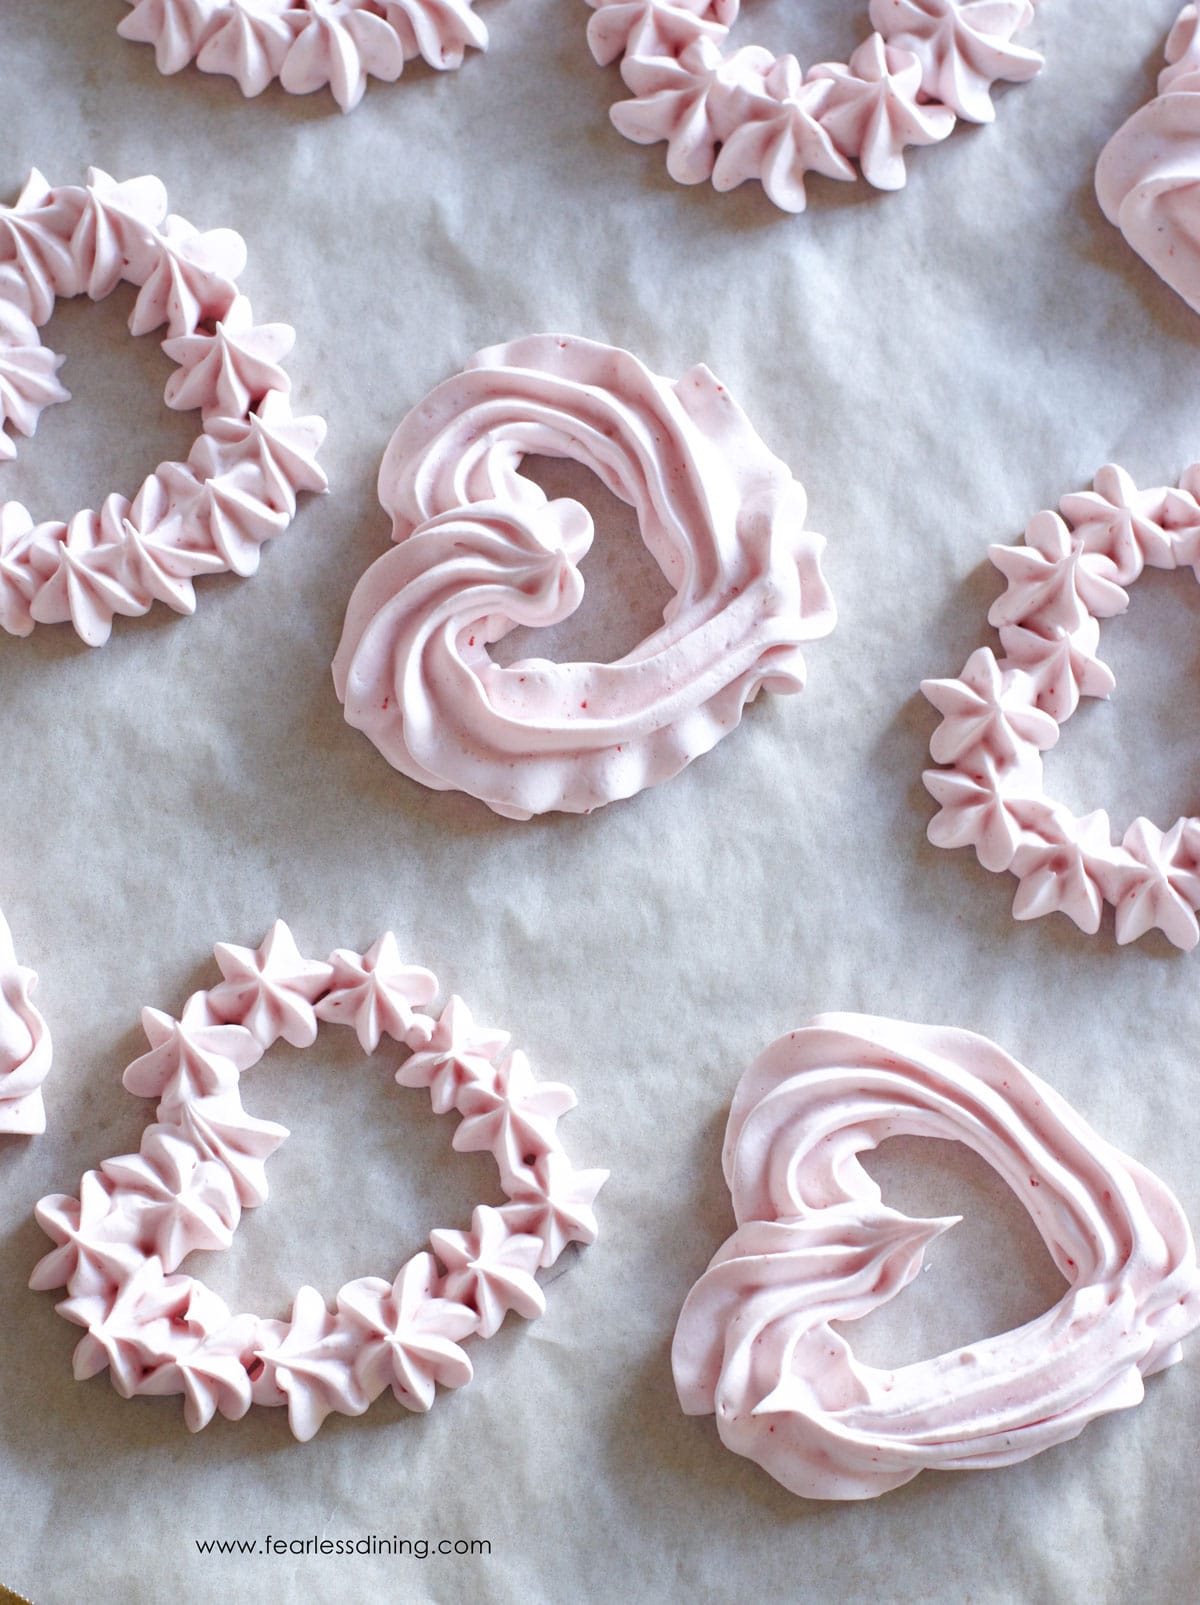 Strawberry meringues piped into heart shapes on a baking sheet.